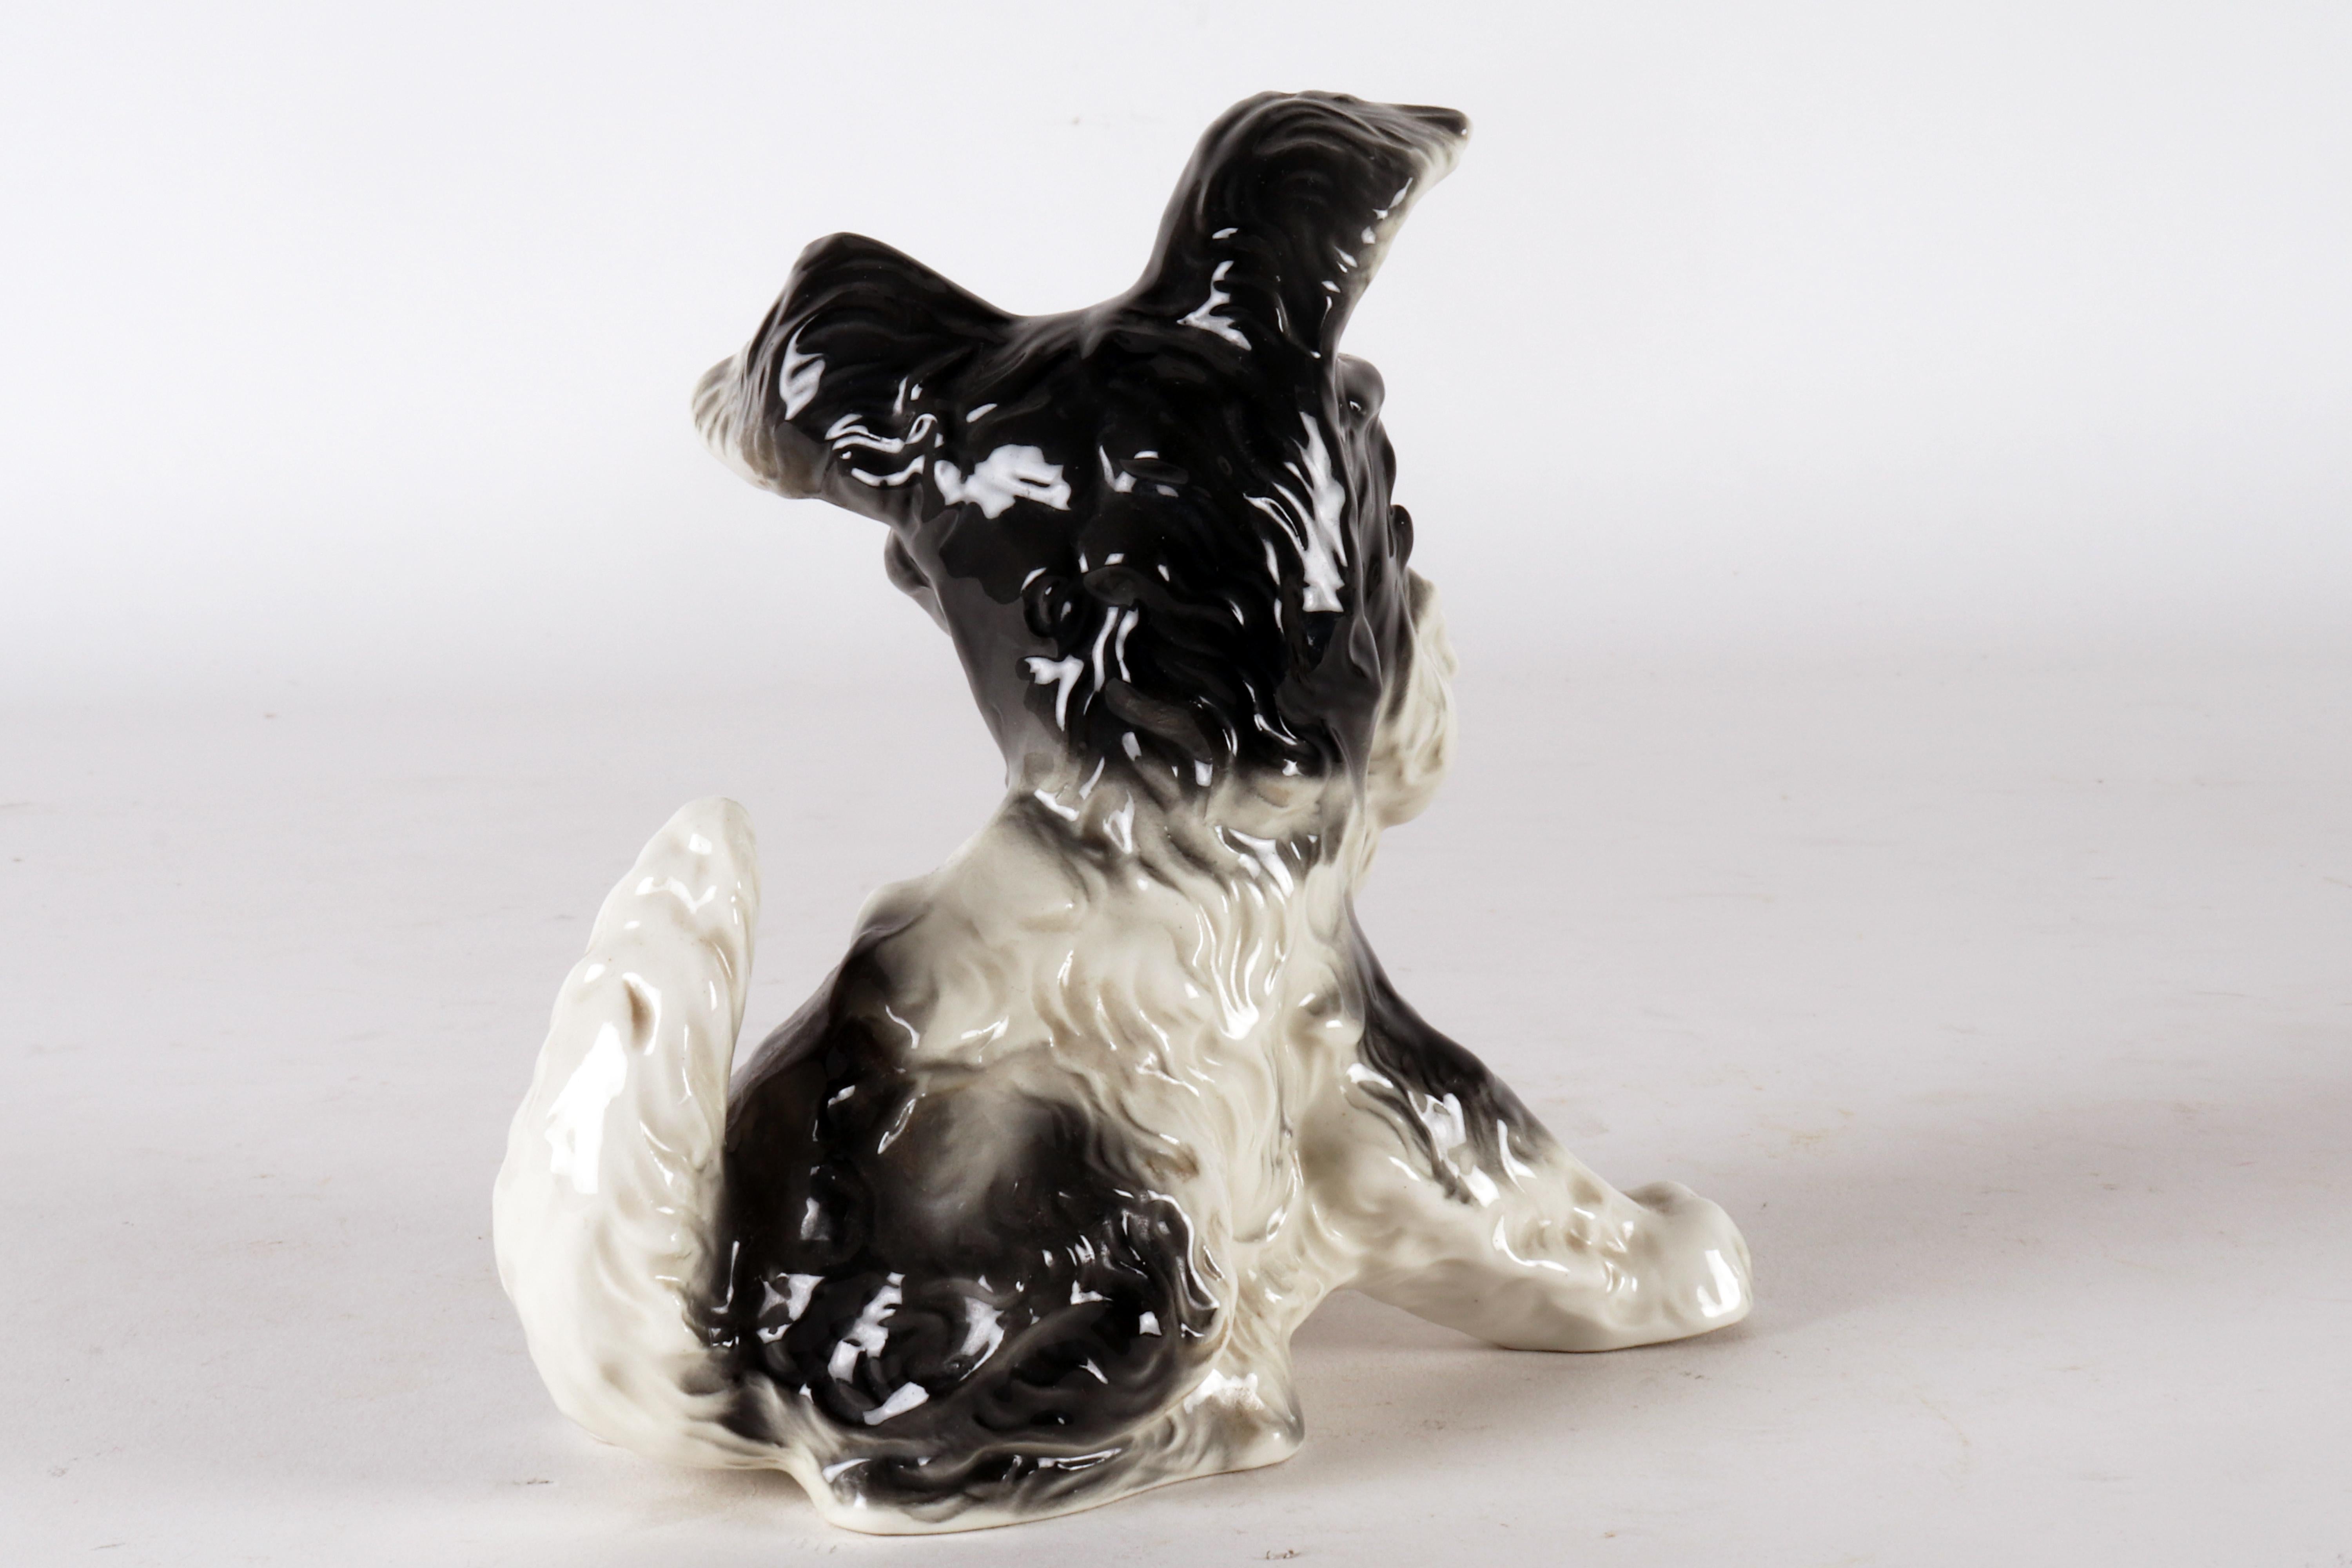 20th Century Porcelain sculpture of a Terrier dog, England Thuringia, Germany, 1940 - 1950. For Sale